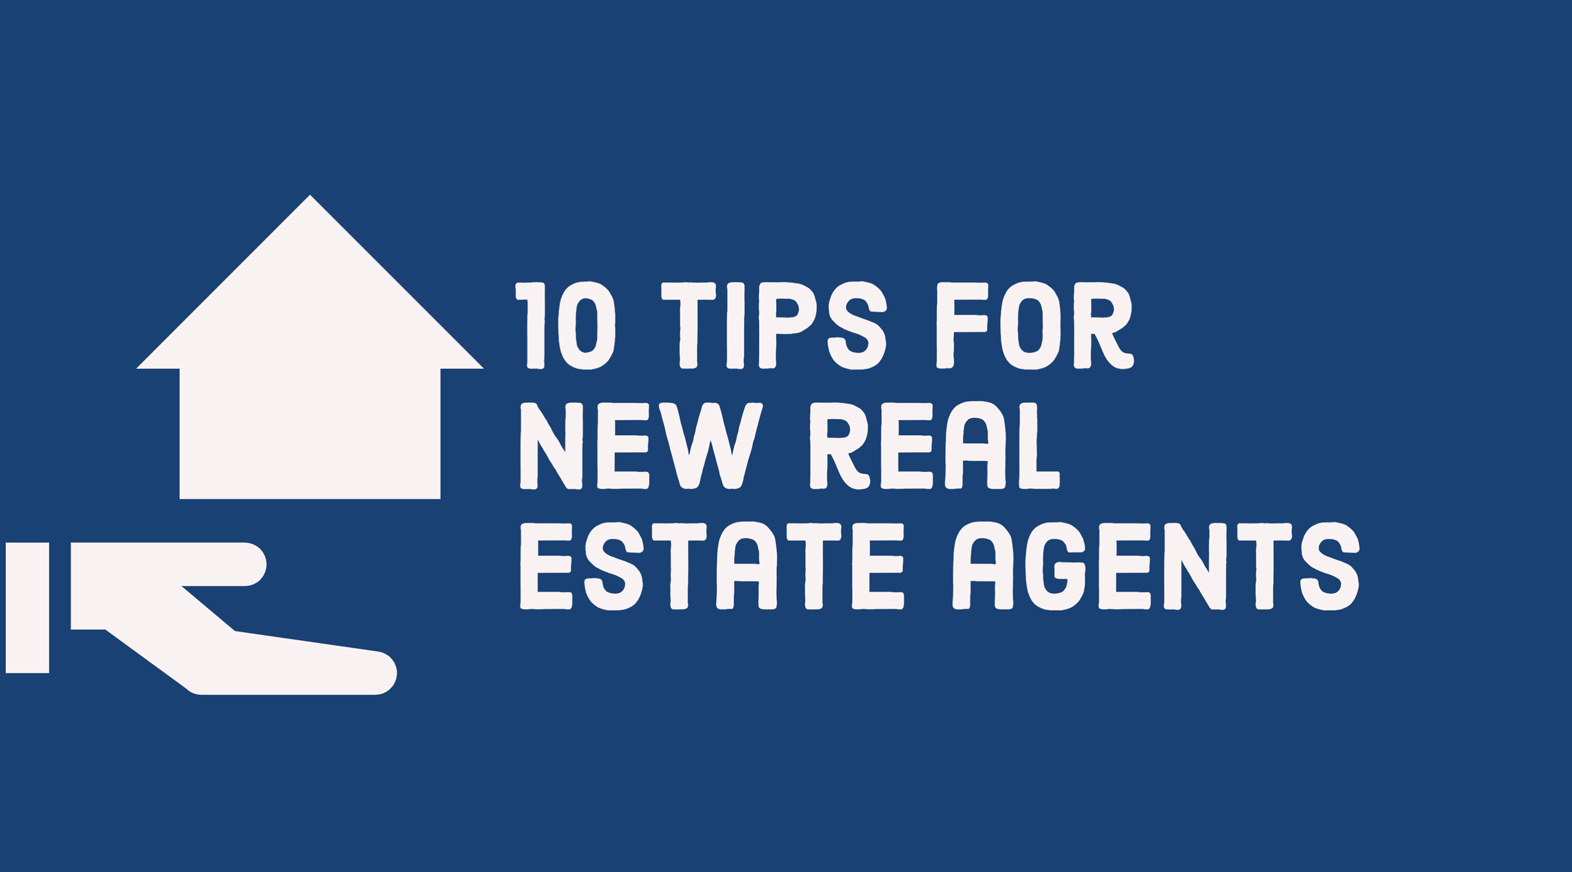 10 tips for new real estate agents